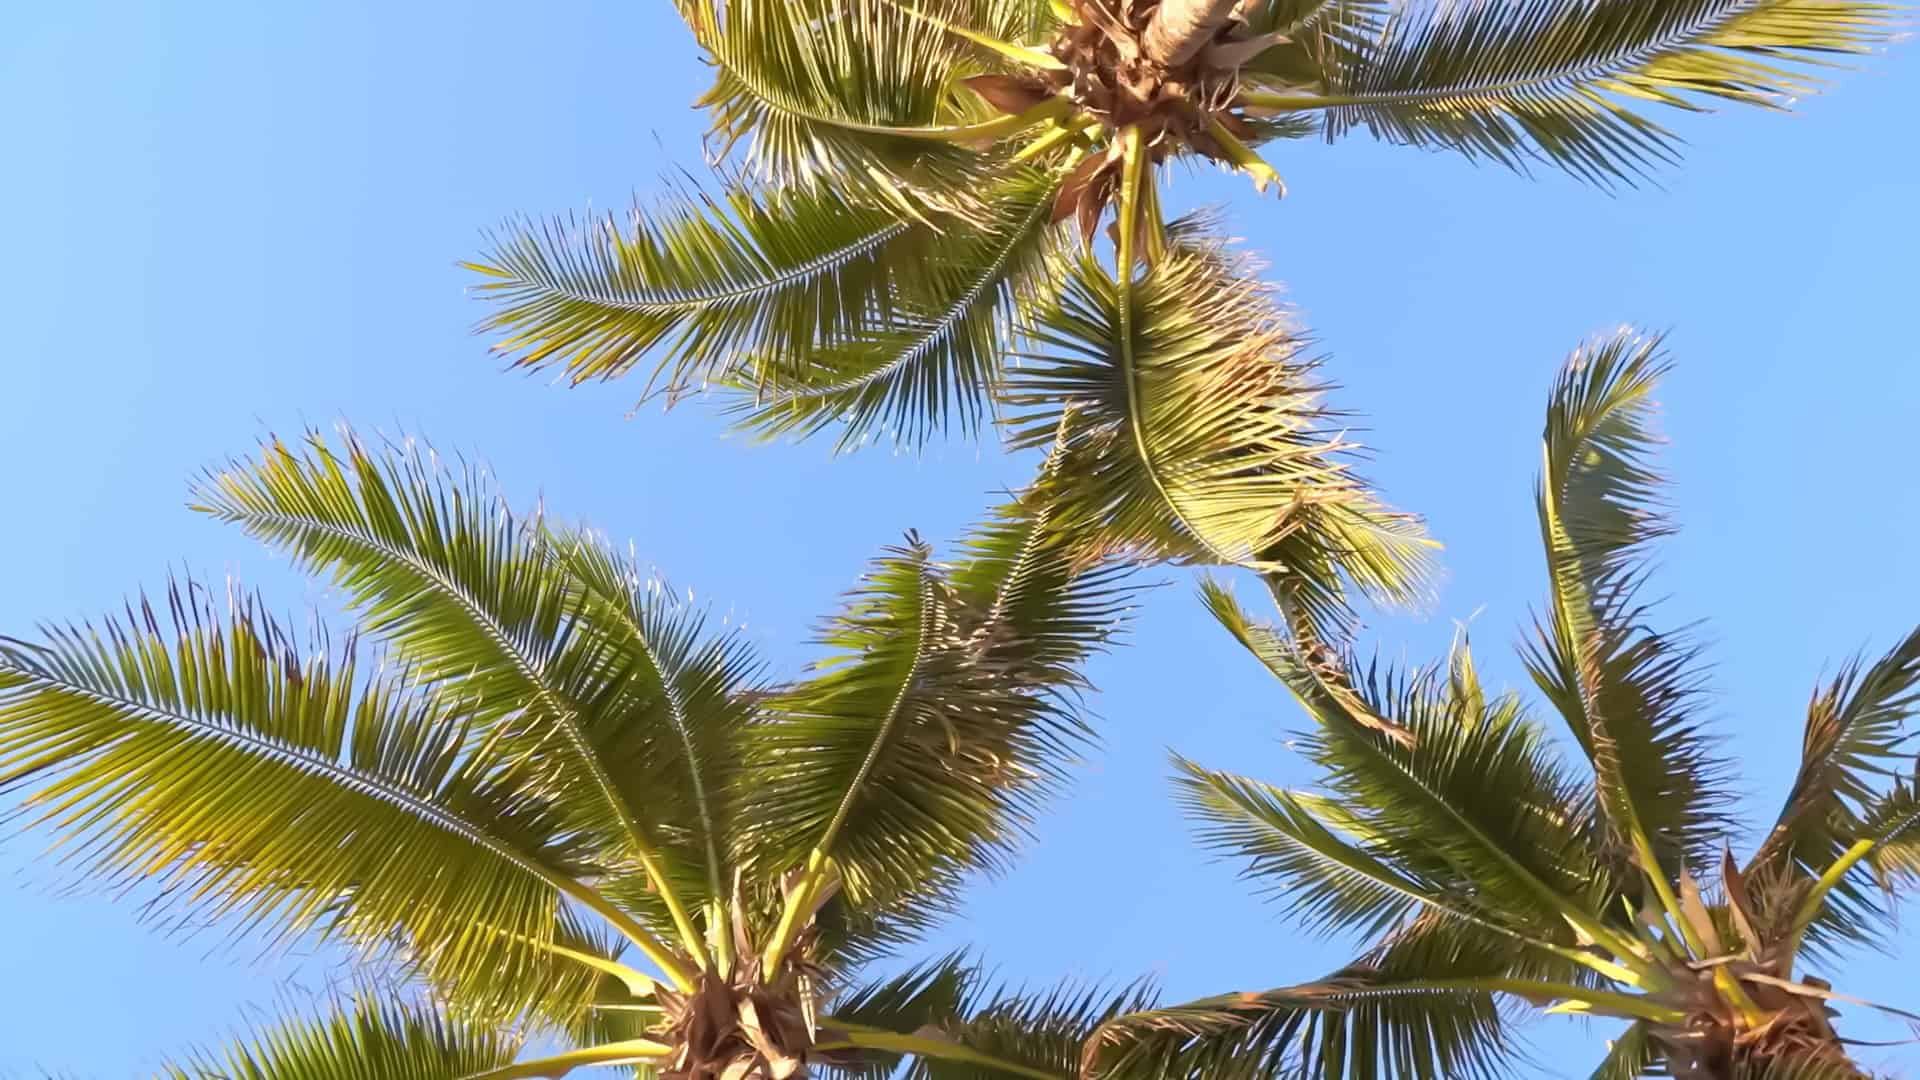 Palm trees swaying under a clear blue sky